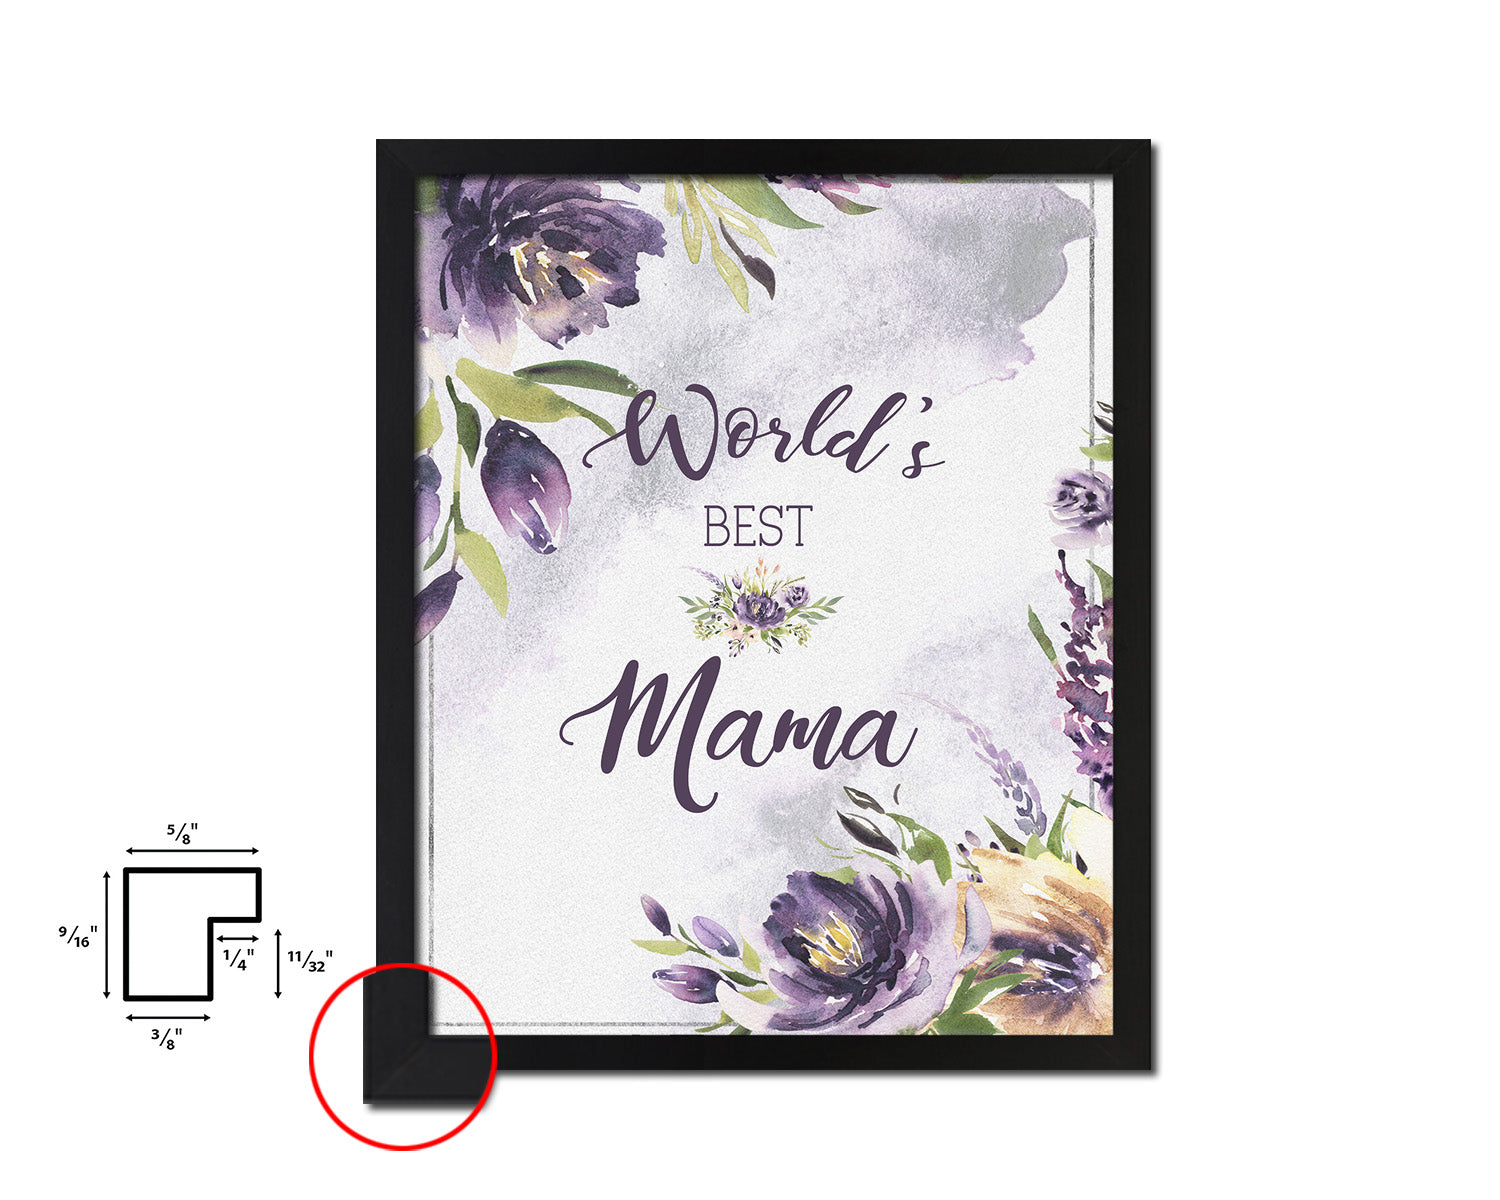 World's best mama Mother's Day Framed Print Home Decor Wall Art Gifts